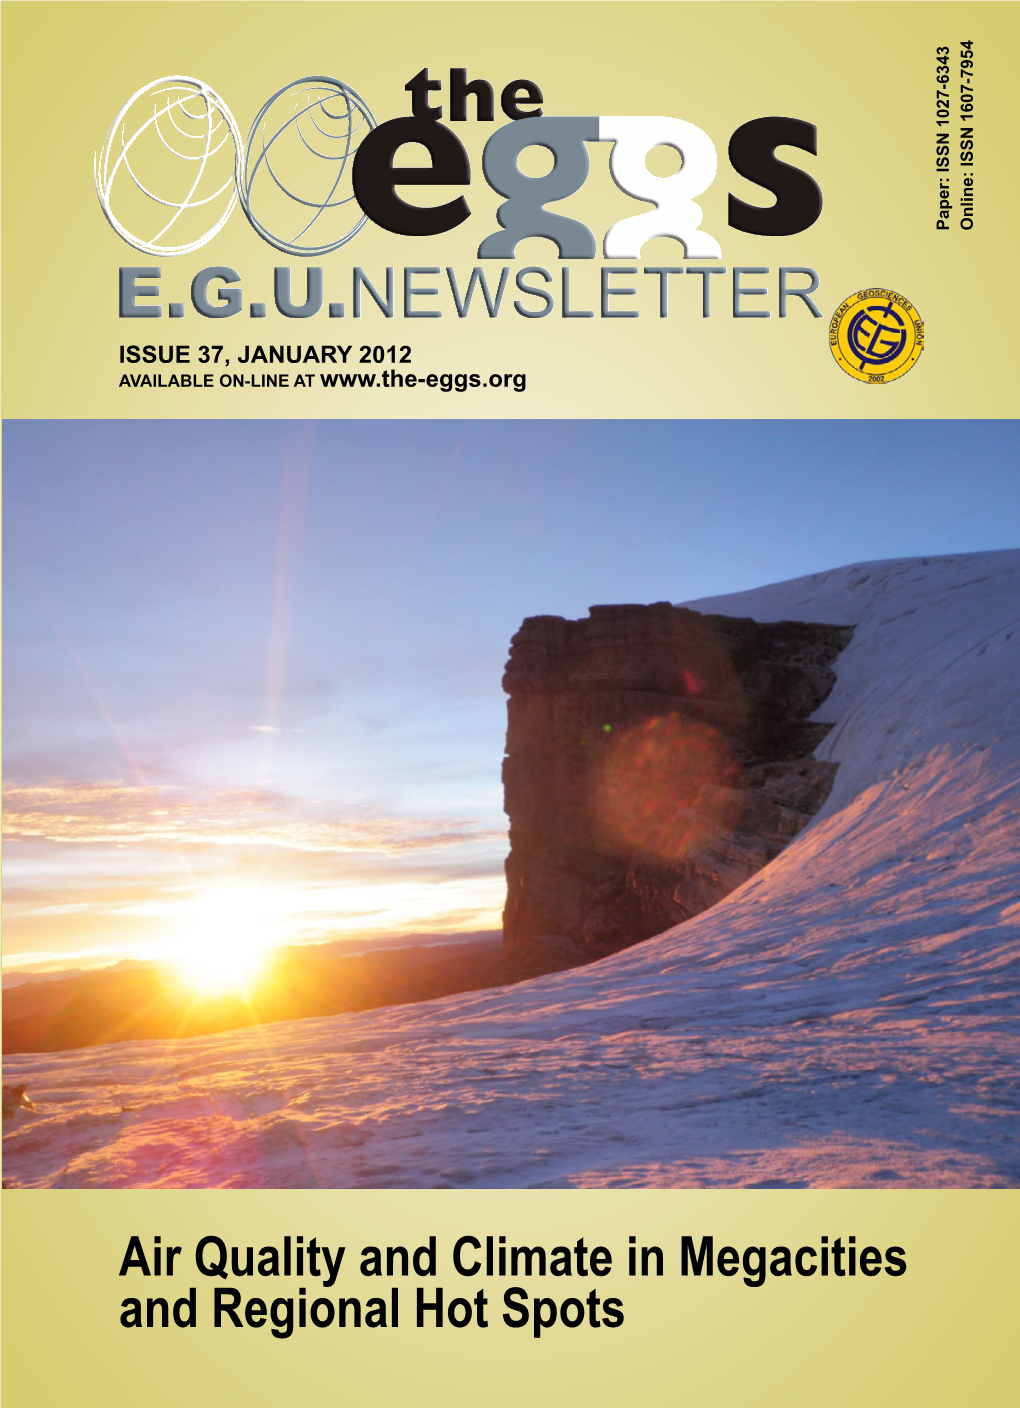 Air Quality and Climate in Megacities and Regional Hot Spots the EGGS | ISSUE 37 | JANUARY 2012